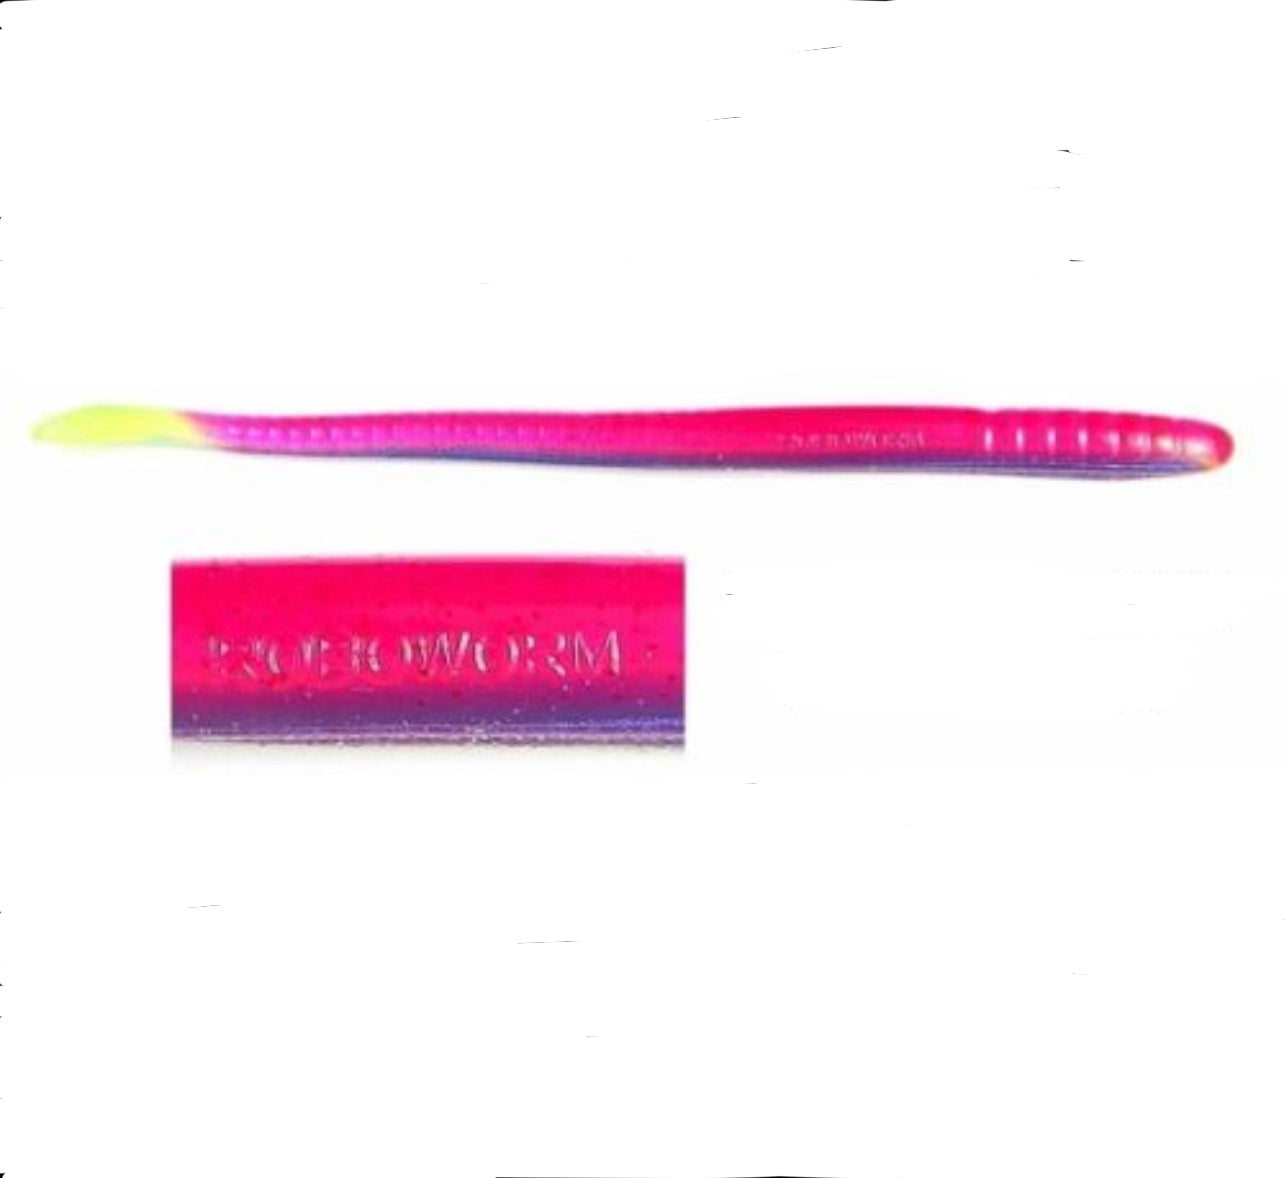 Roboworm 6" Fat Straight Tail Worm